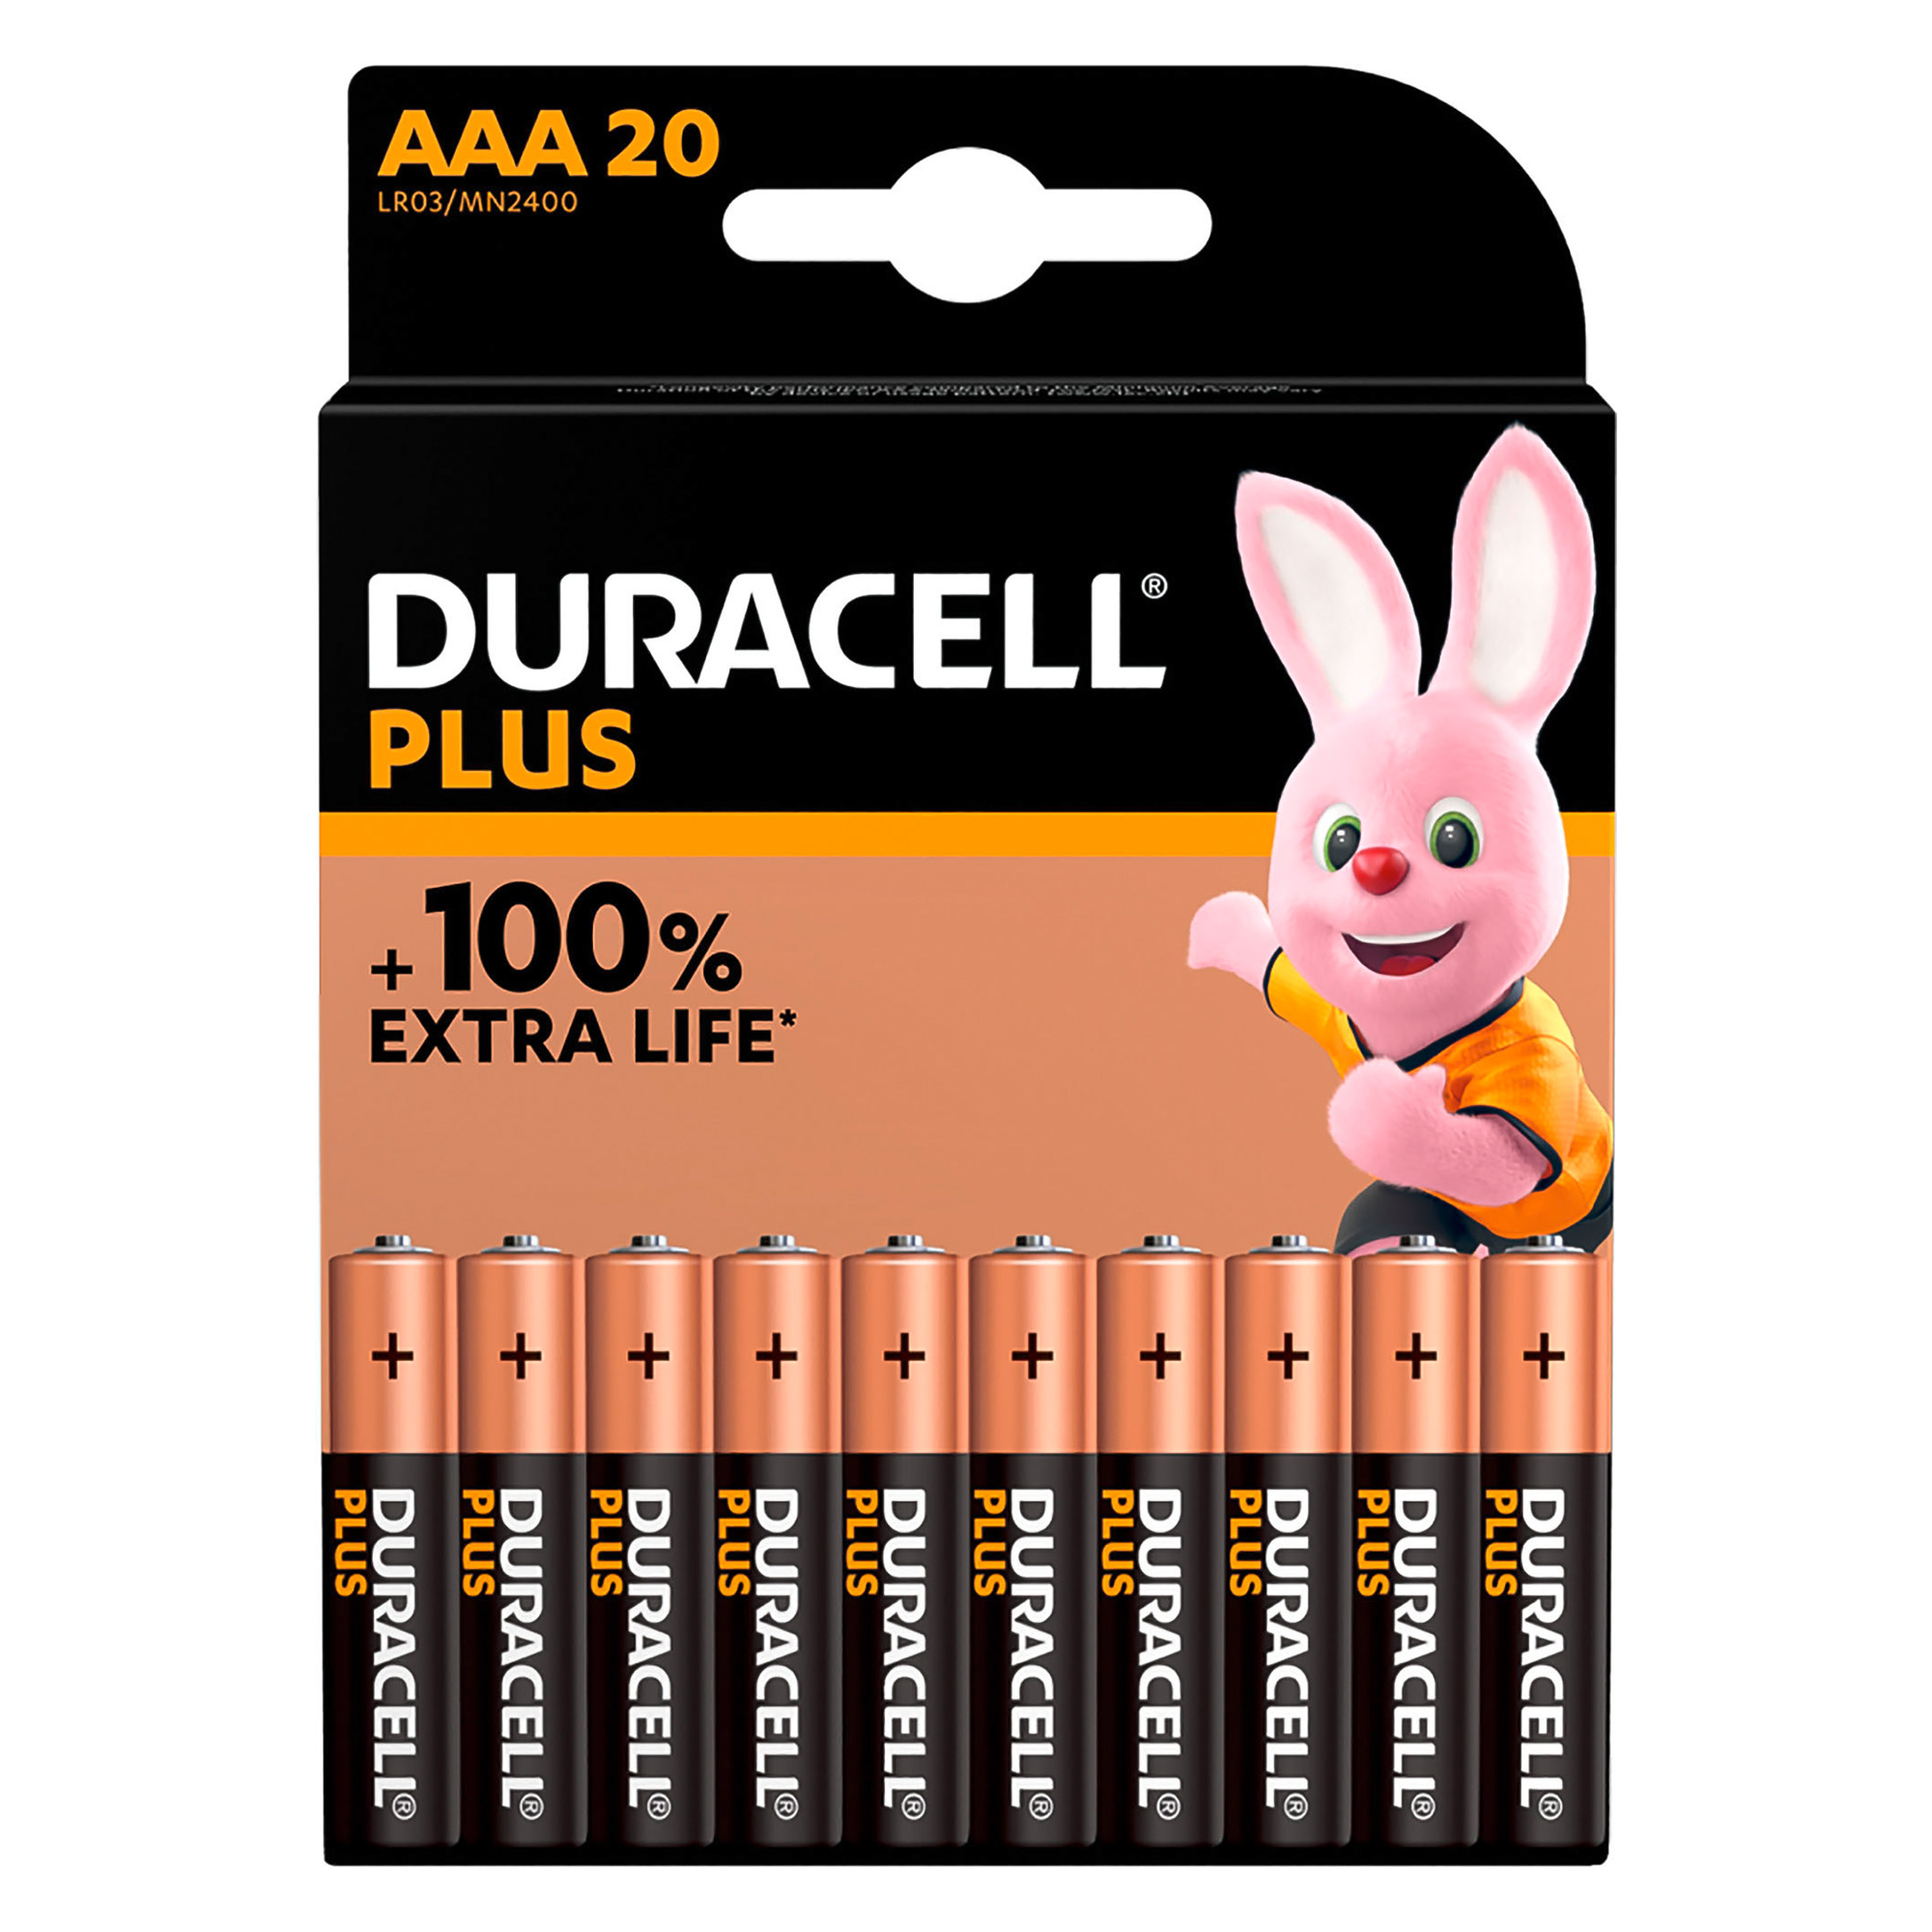 Pack 15 batteries LR3 Duracell Plus AAA + 5 for free on